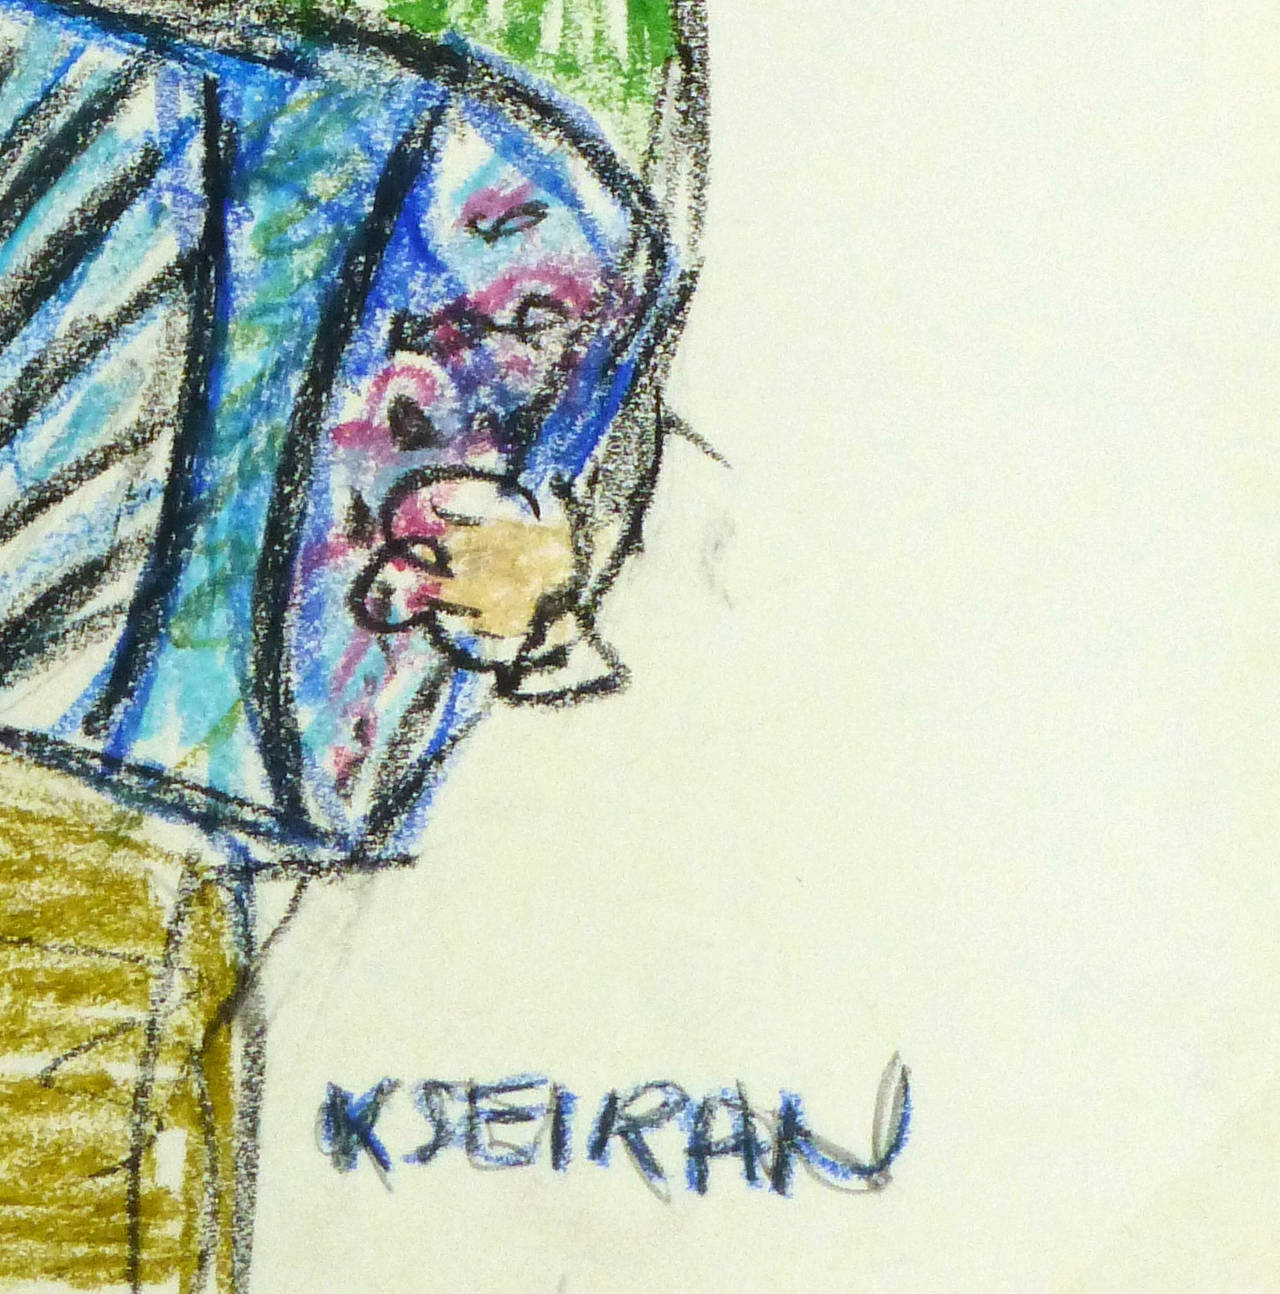 French Oil Pastel - The Accordion Man - Art by Kseiran